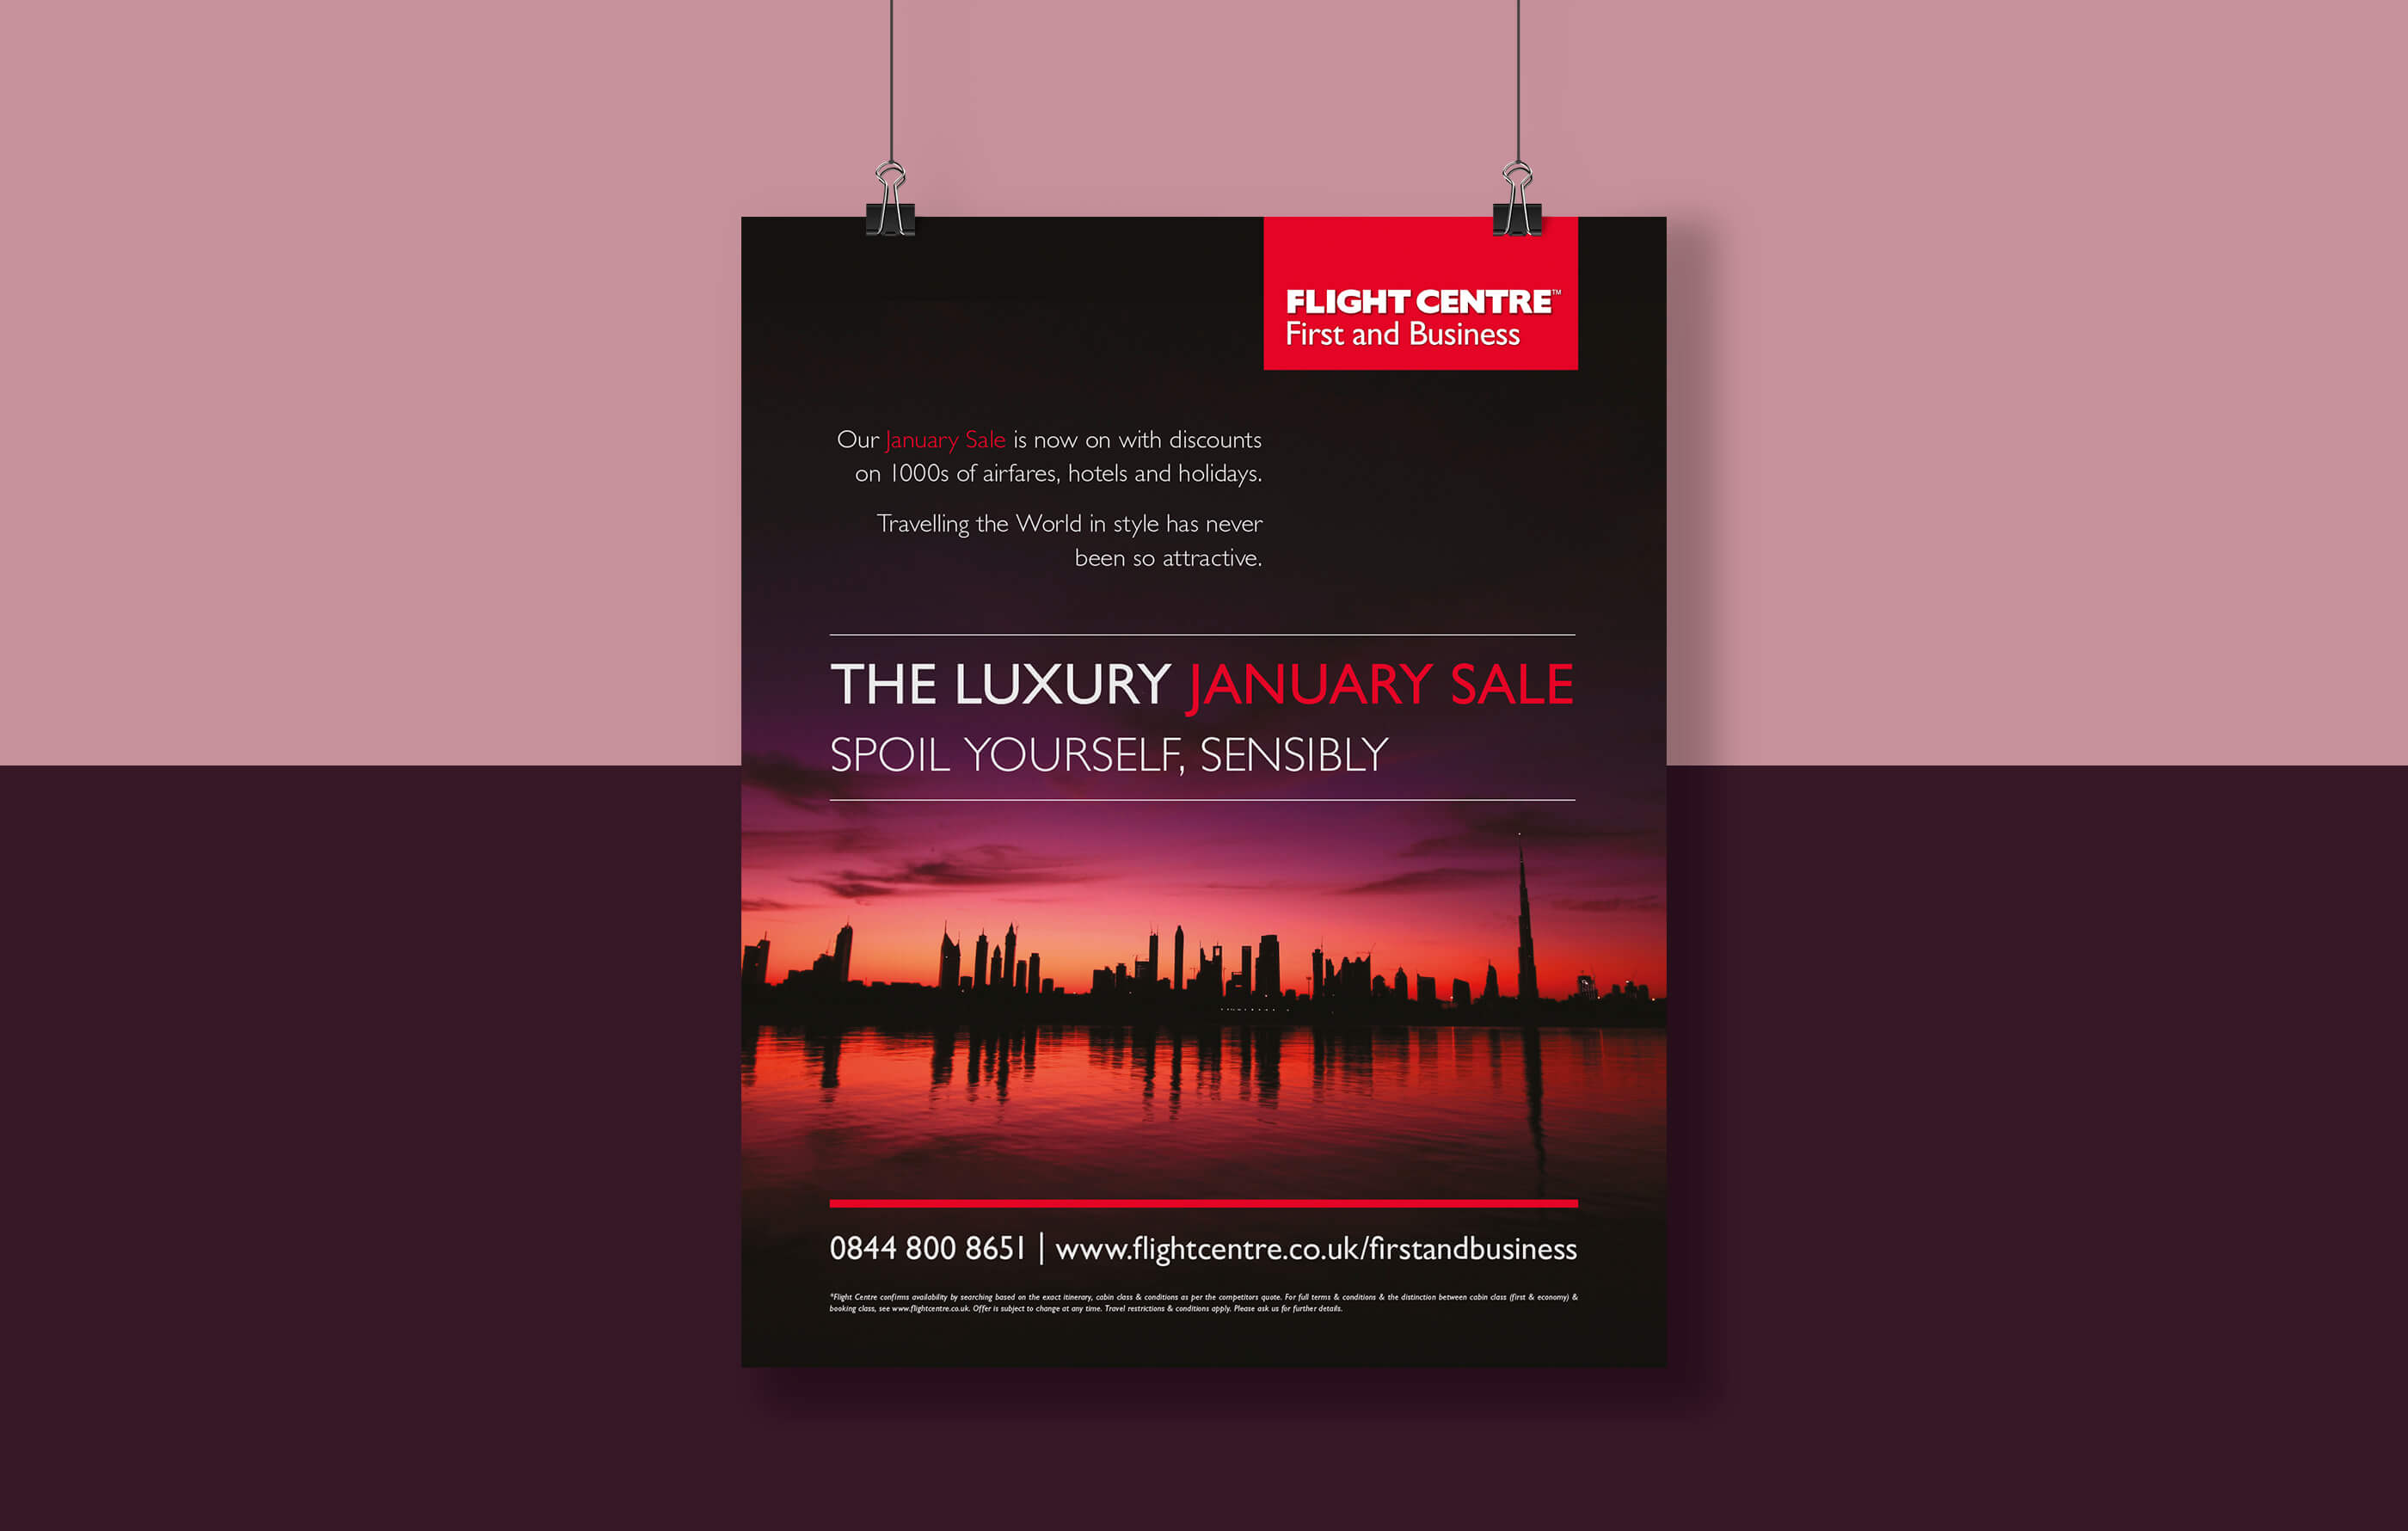 Spoil Yourself Sensibly luxury January sale poster hung on clips, set against a horizontal pink and purple background'